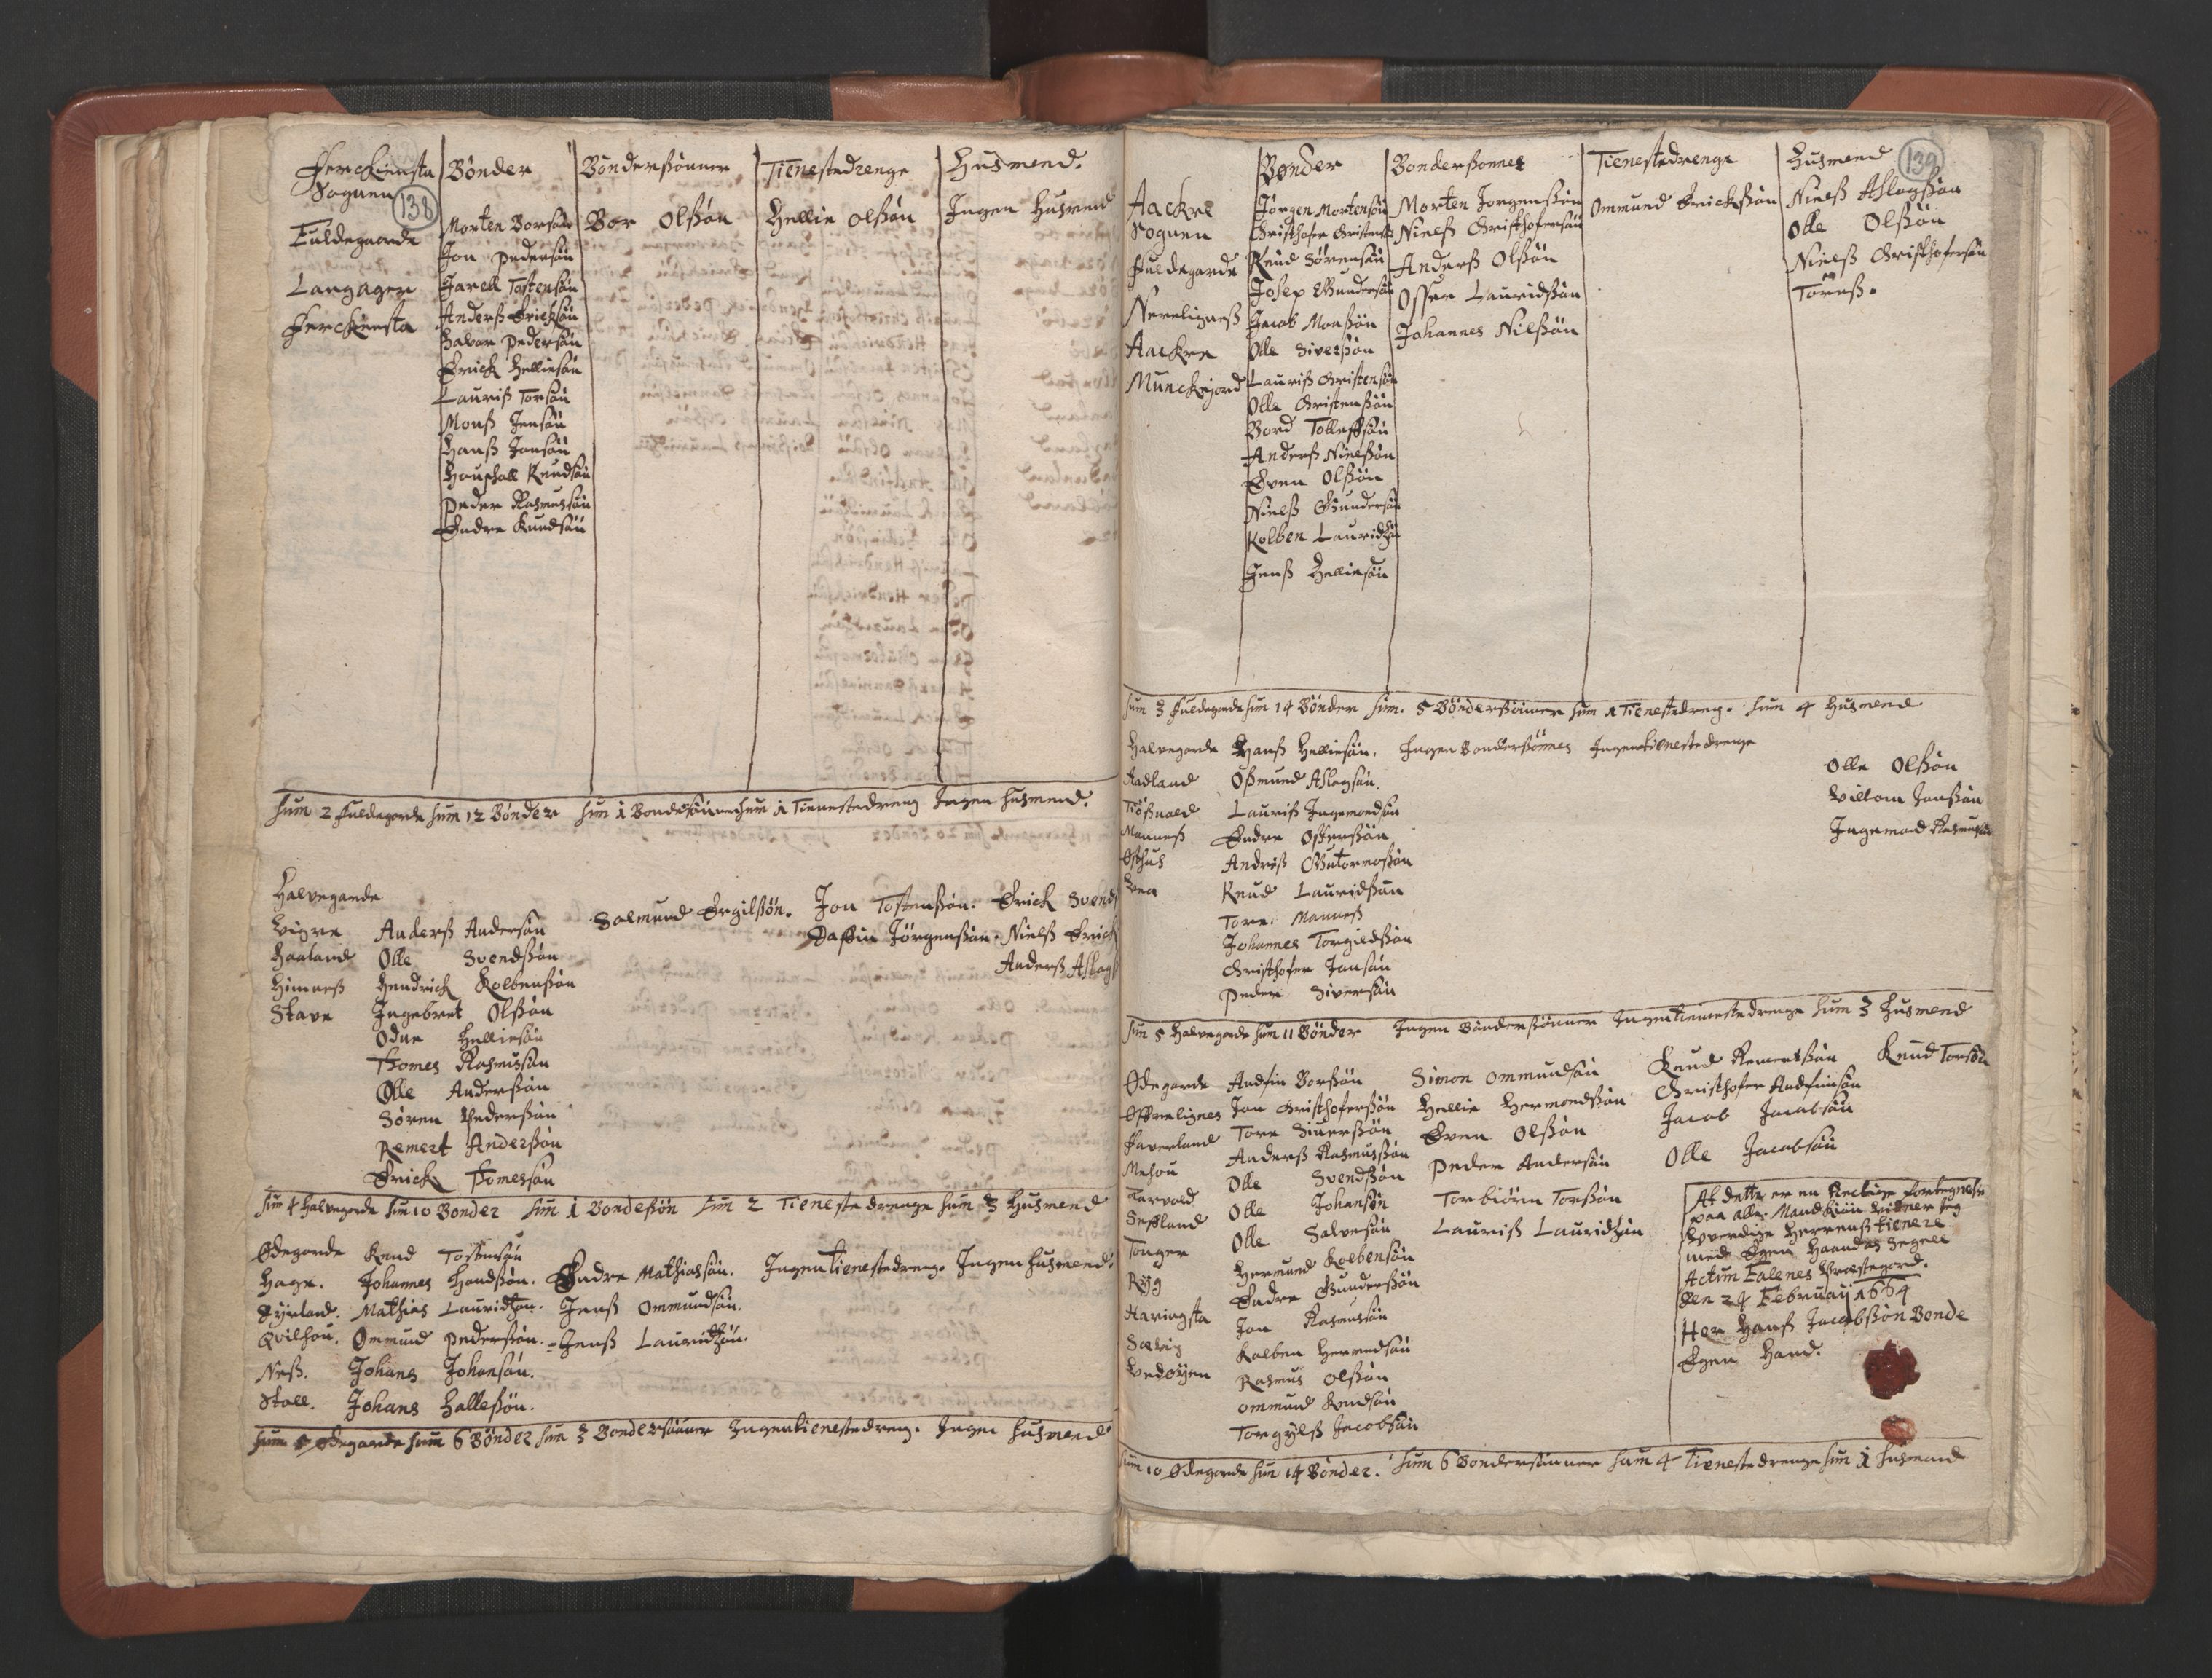 RA, Vicar's Census 1664-1666, no. 18: Stavanger deanery and Karmsund deanery, 1664-1666, p. 138-139